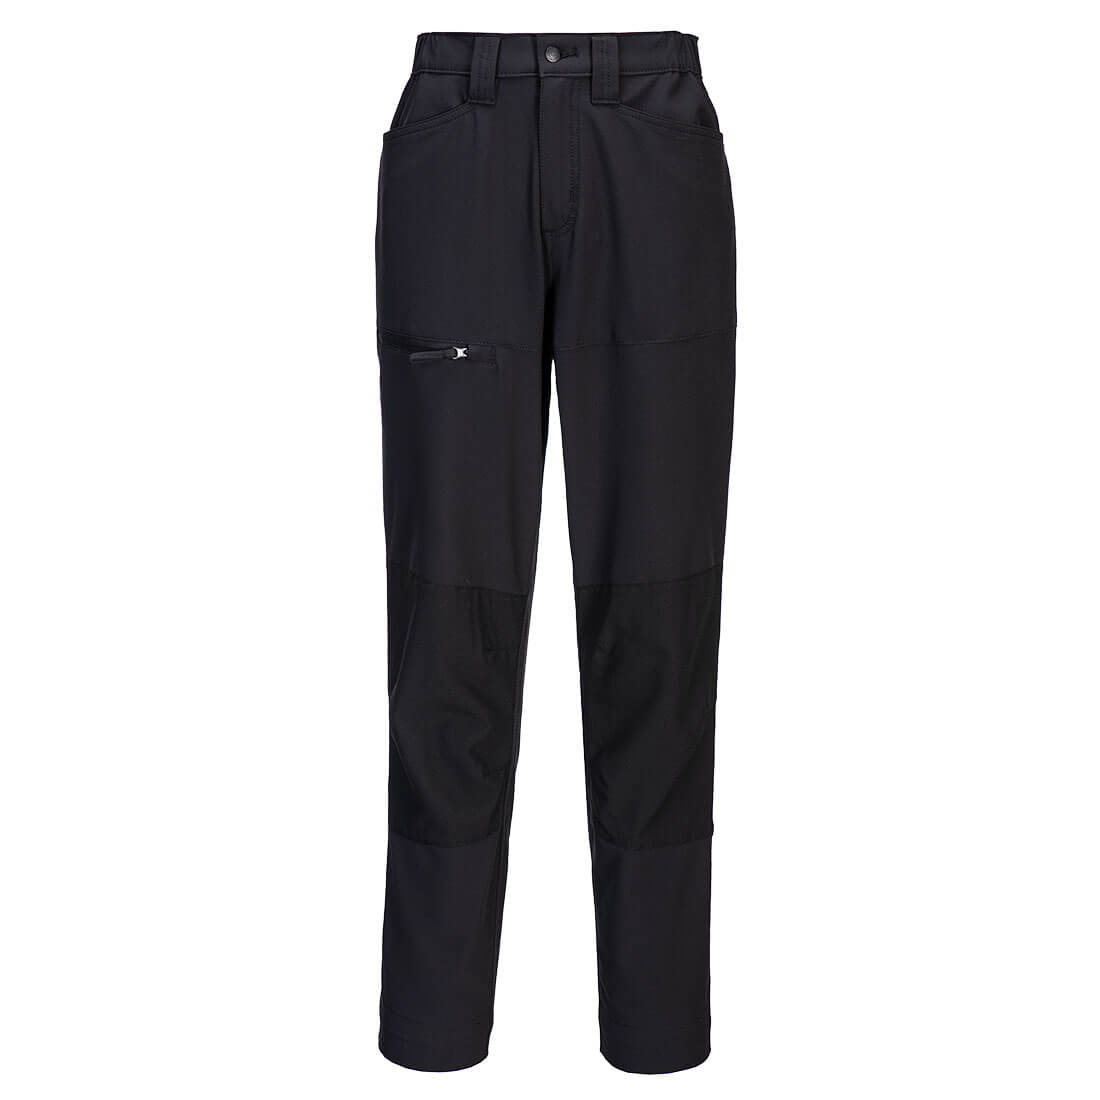 Womens Stretch Work Trousers